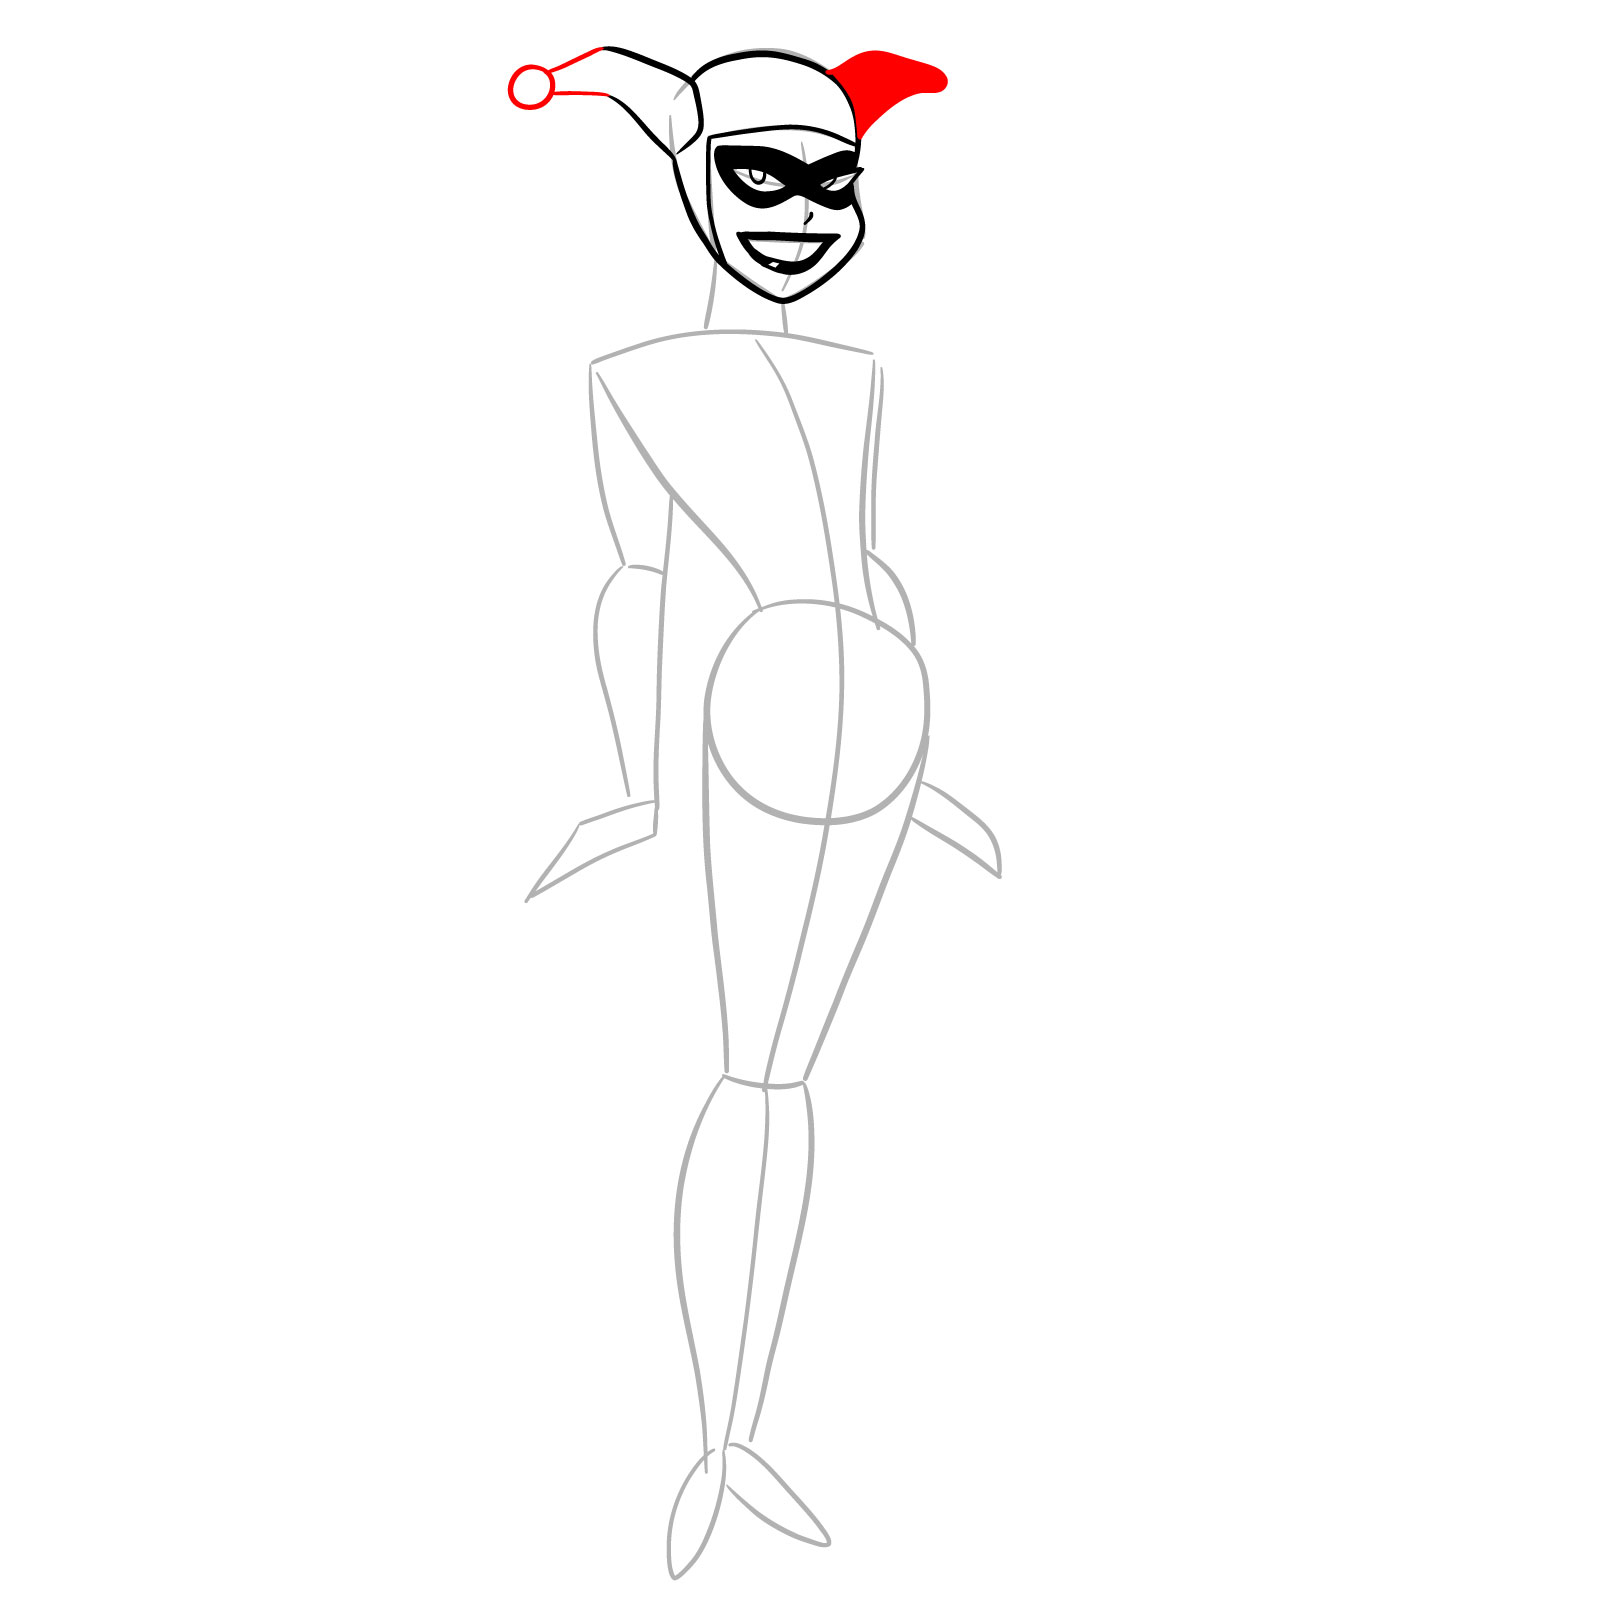 How to draw Harley Quinn in a classic suit - step 09